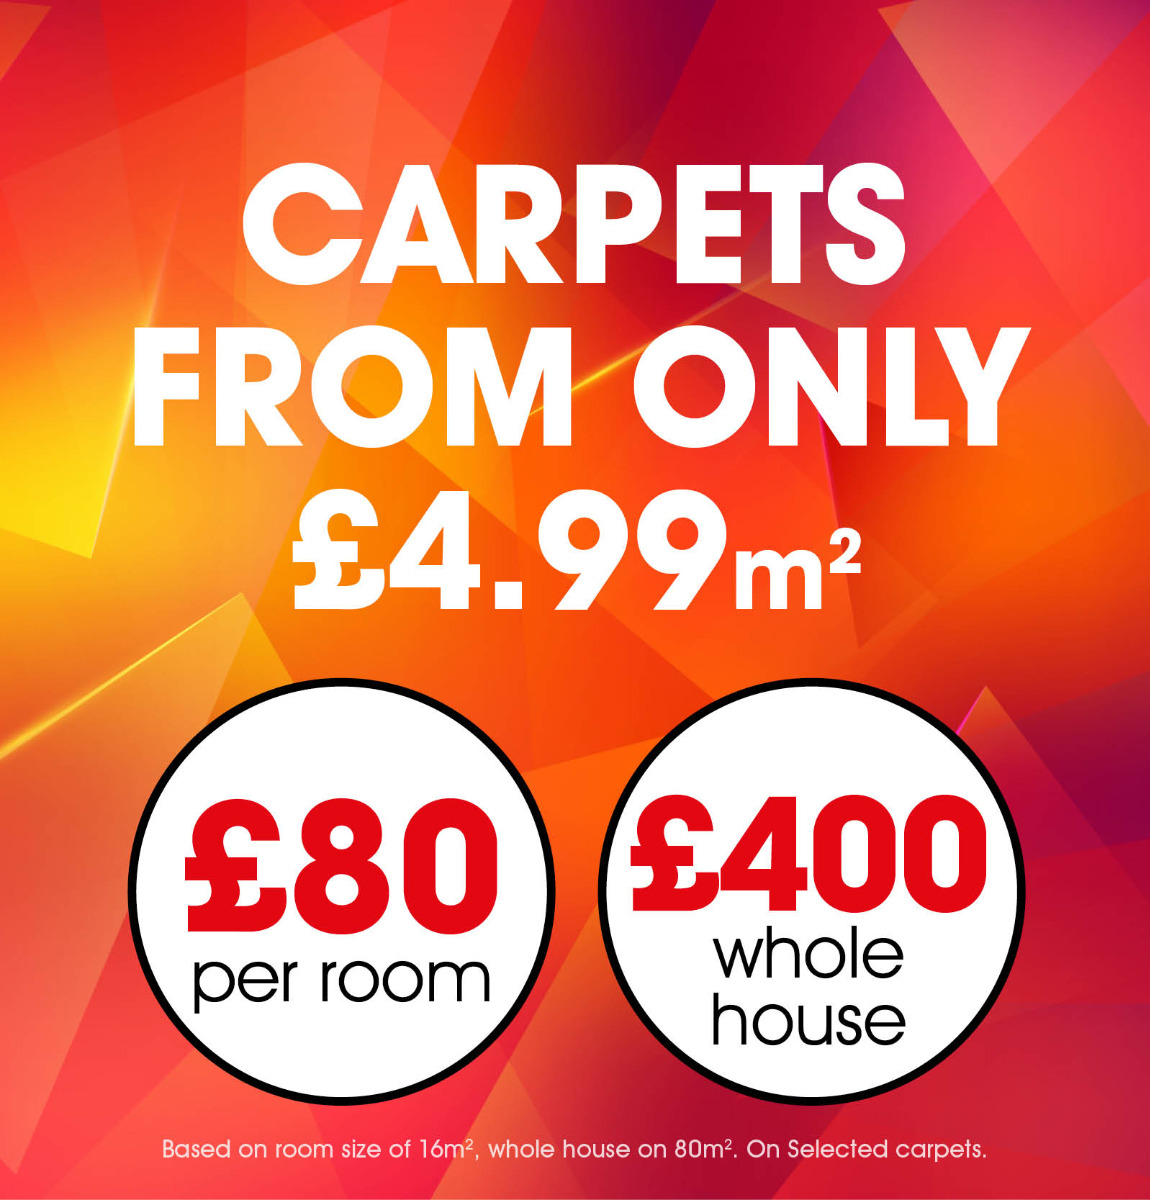 United Carpets and Beds - Carpets from only £4.99 m2r